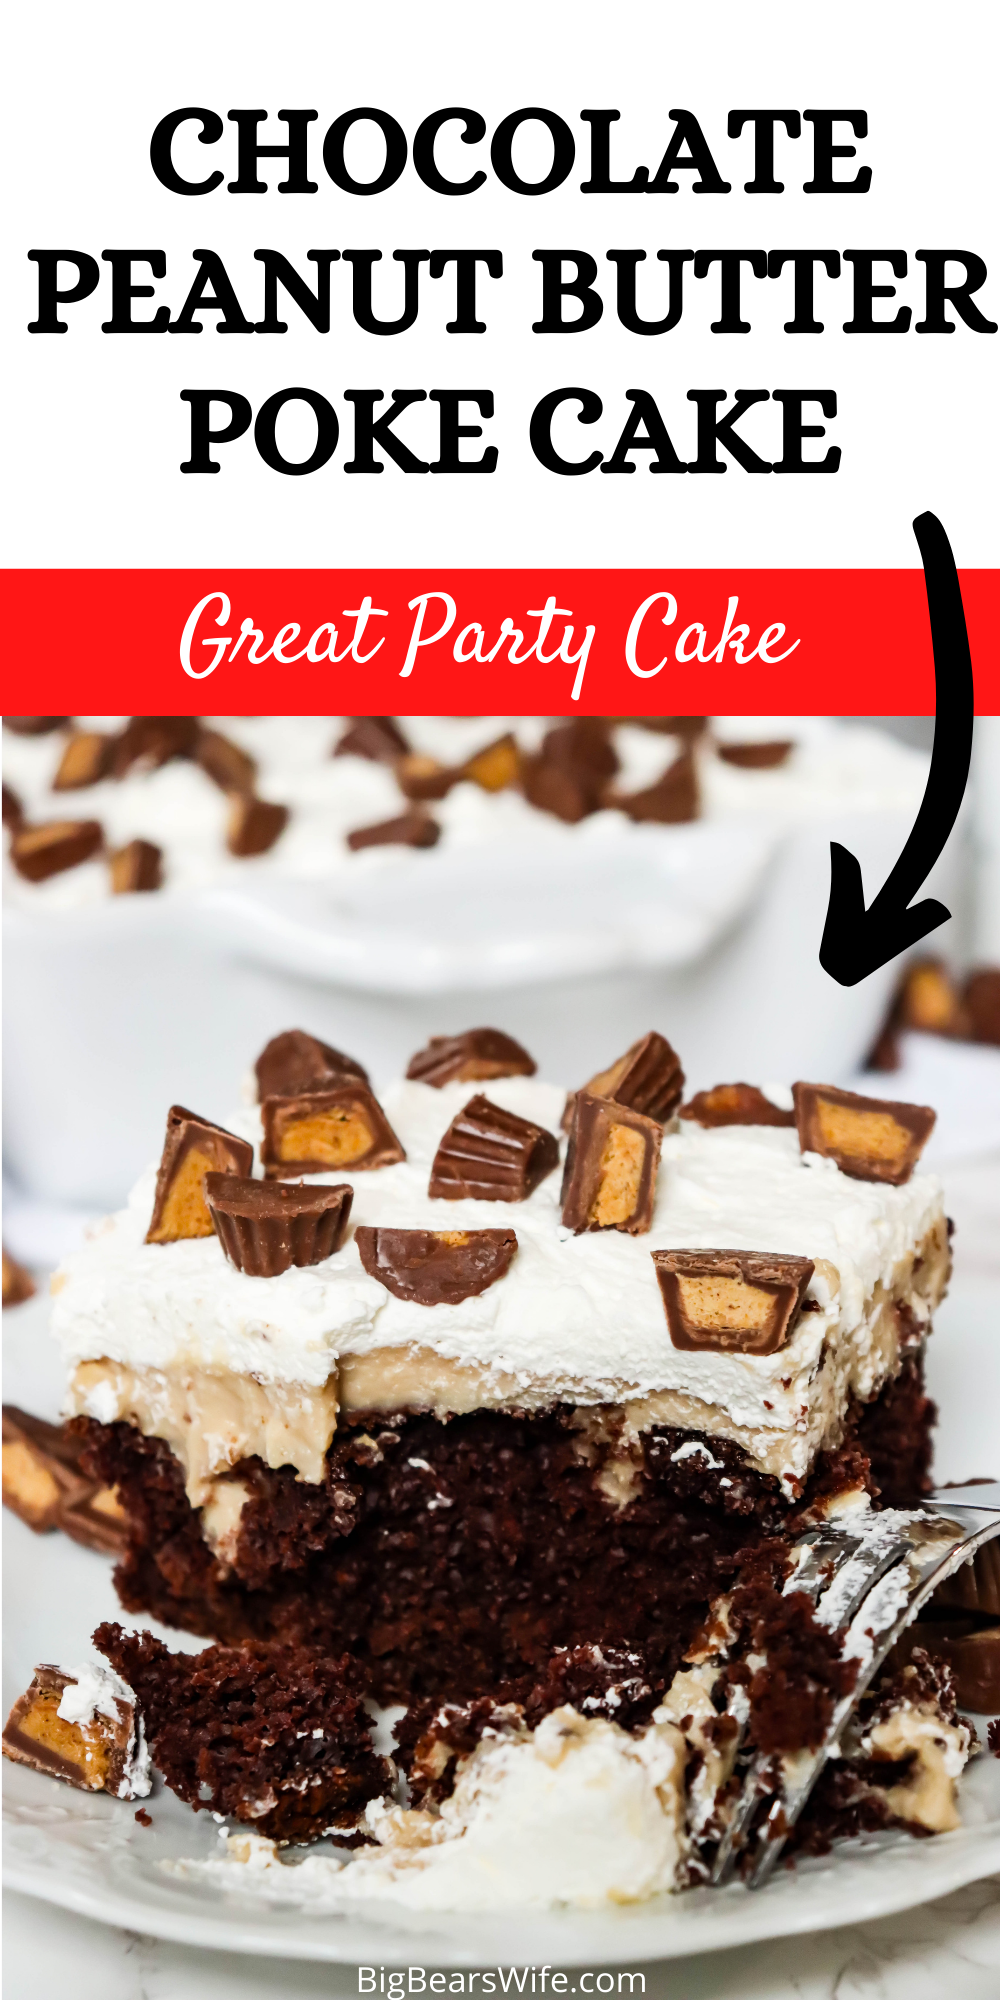 This Chocolate Peanut Butter Poke Cake is a rich homemade chocolate cake topped with homemade peanut butter pudding, Crème Chantilly and chopped peanut butter cups makes the perfect treat! Peanut Butter and Chocolate lovers will go crazy over this fun cake!  via @bigbearswife